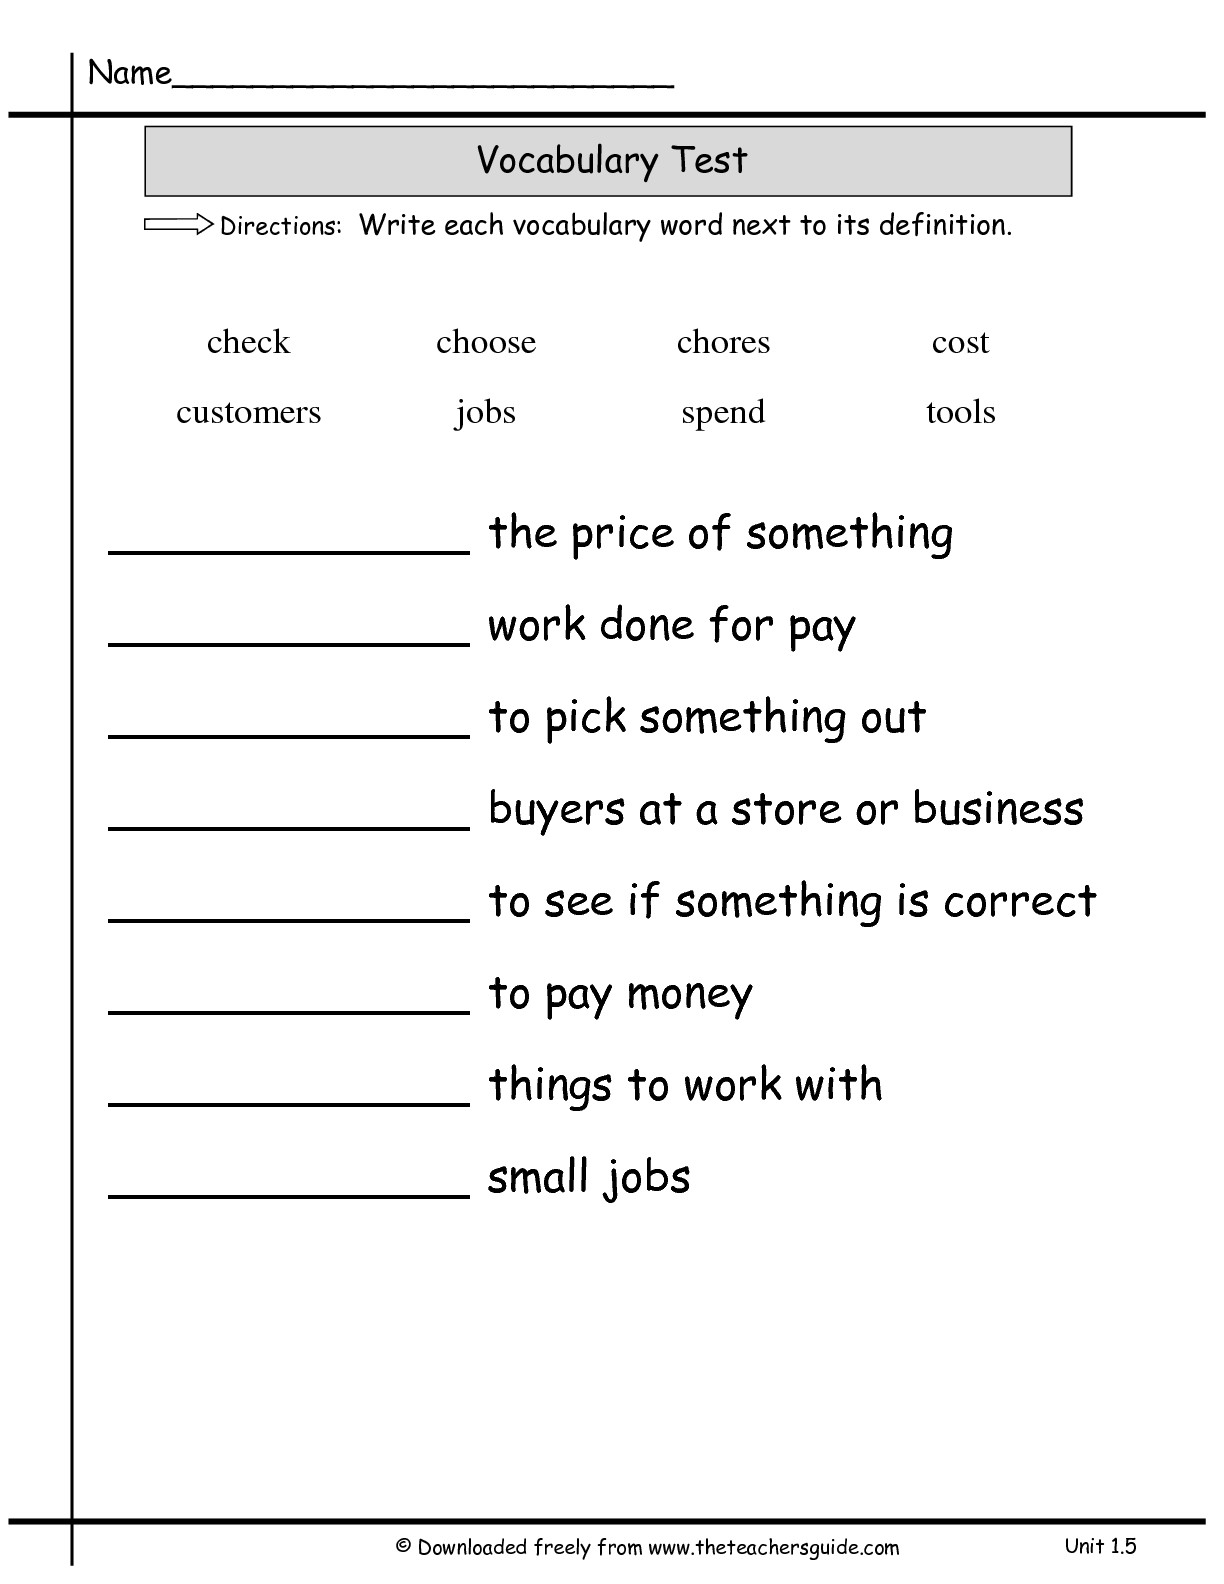 11 Vocabulary Word And Definition Worksheet Worksheeto